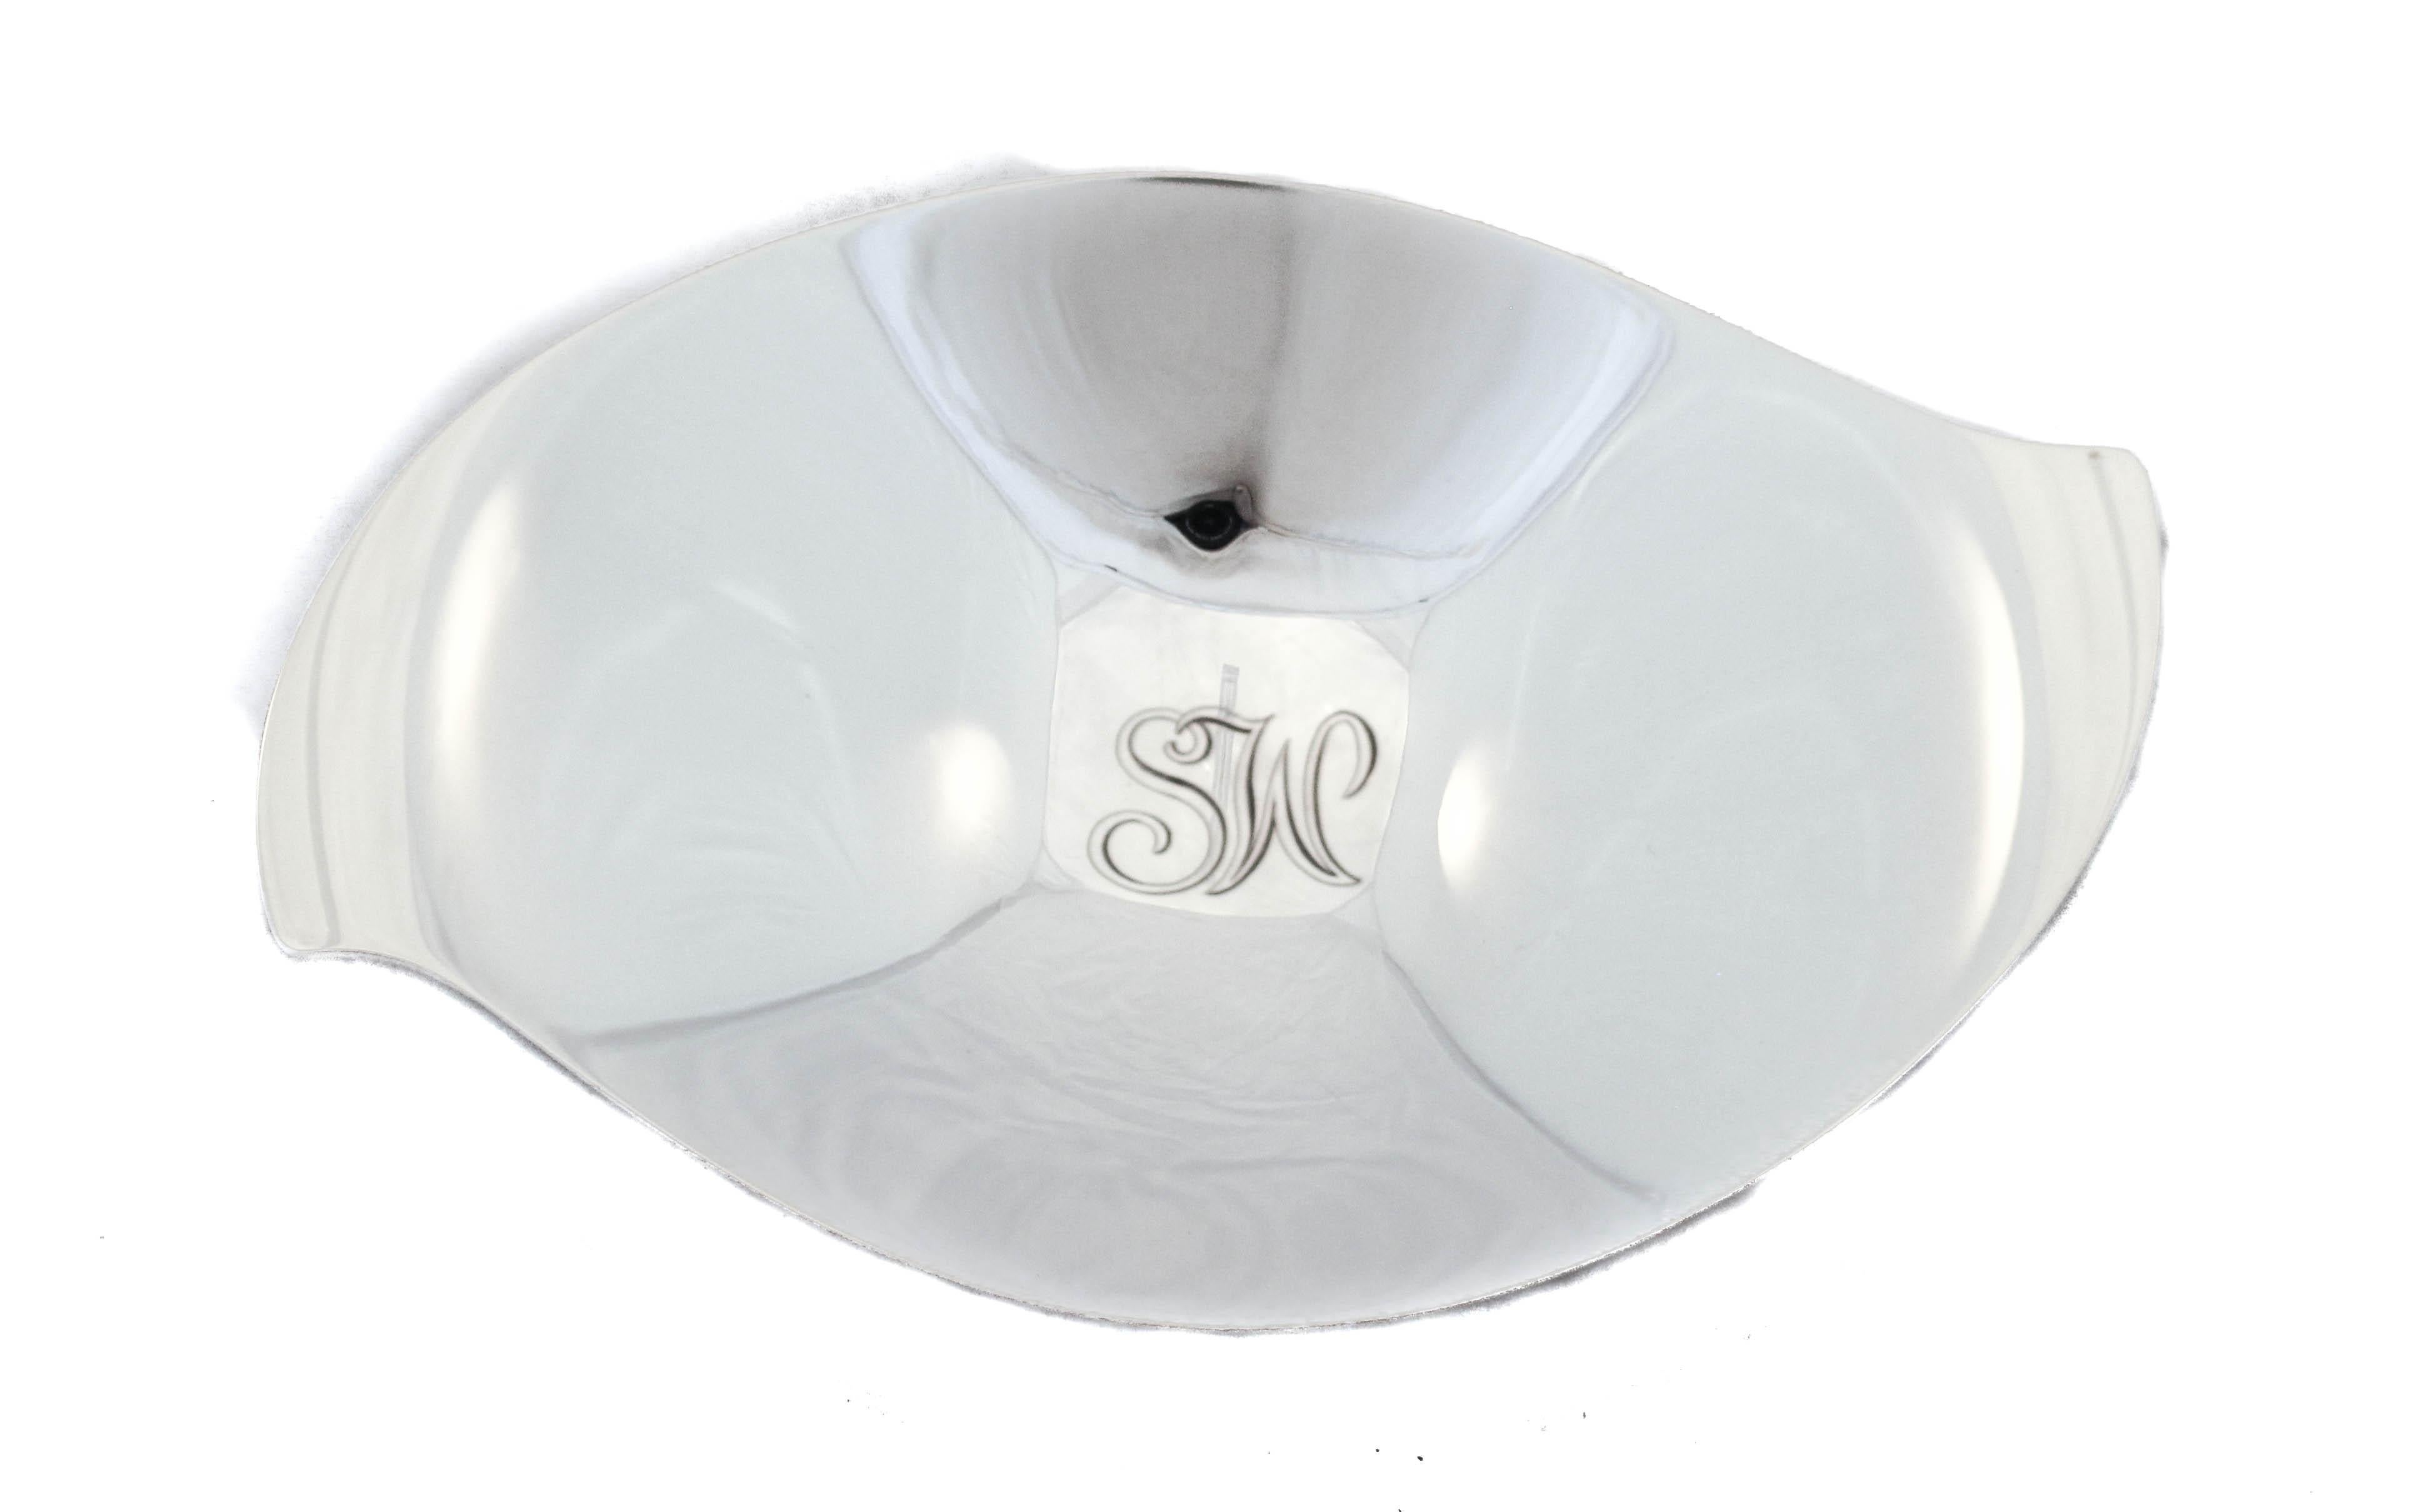 We are happy to offer you this pair of sterling silver dishes by the world renowned Tiffany & Company. With their distinctive Mid-Century style and shape they are sure to look beautiful in your home. They have a swirl shape and stand on four balls.